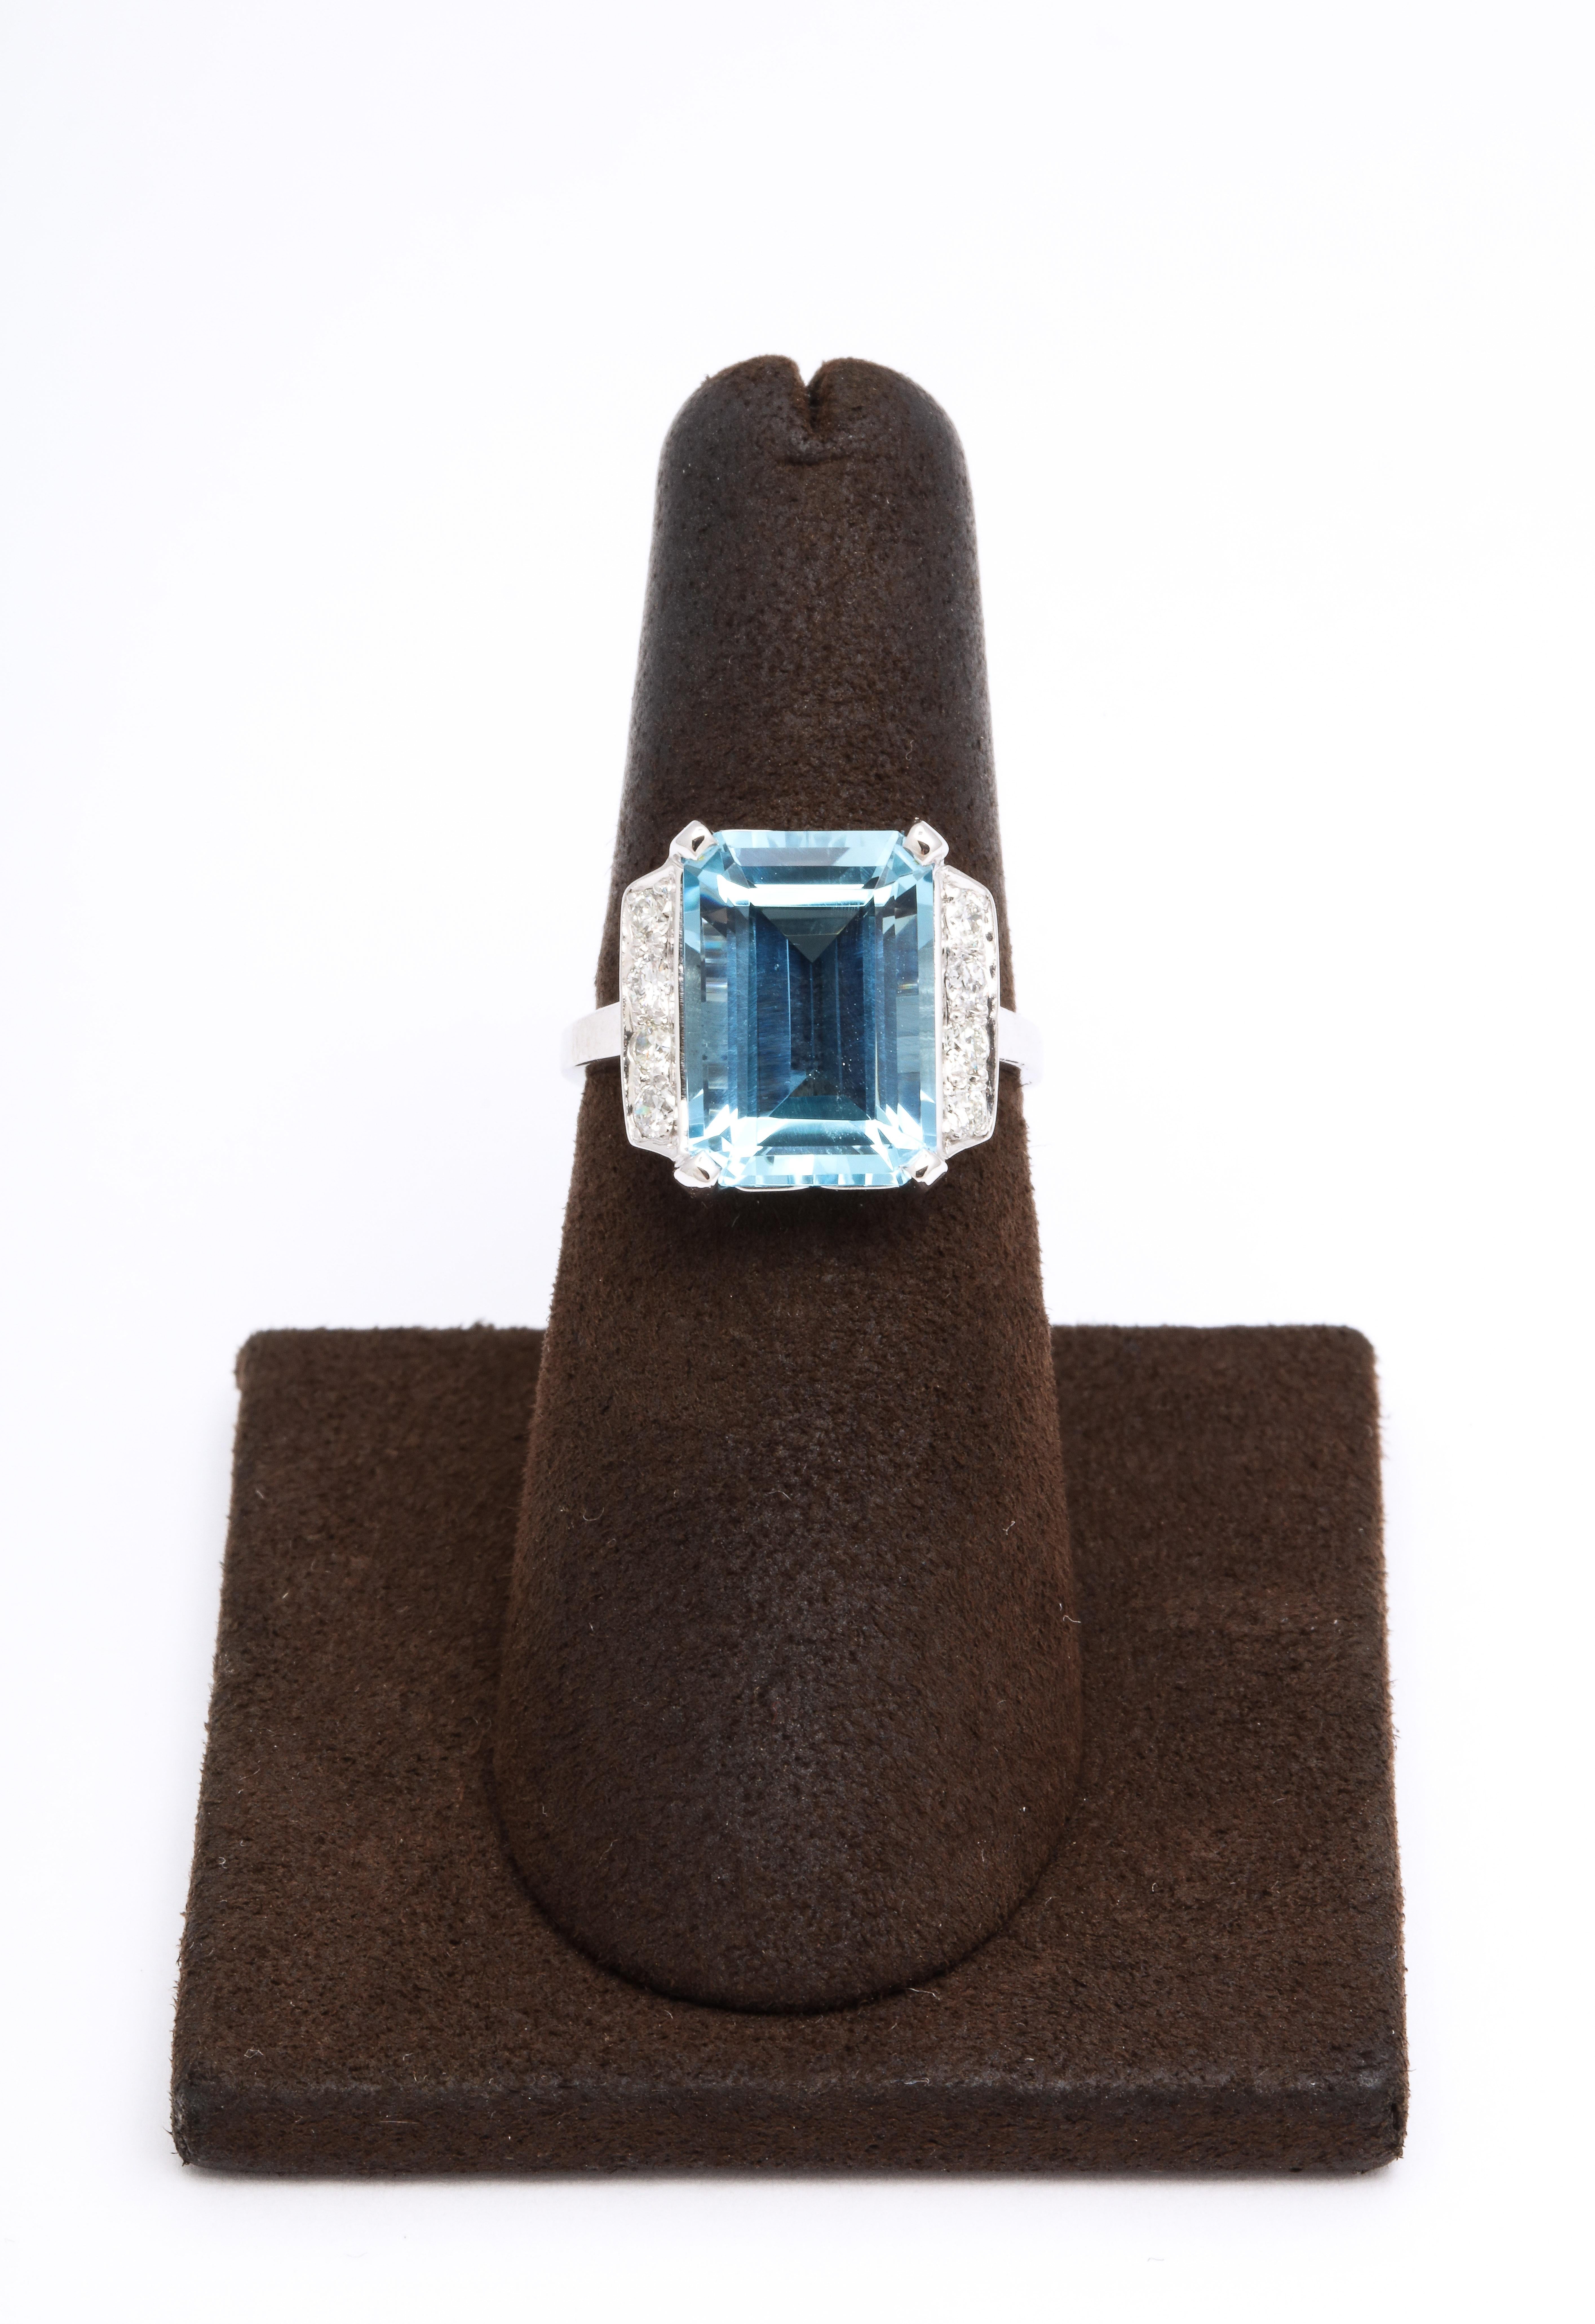 
4.58 carat emerald cut Aquamarine

.40 carats of white round brilliant cut diamonds. 

Approximately 14.2 mm long.

Set in platinum 

Size 5.75, can easily be resized. 

A timeless piece -- a PERFECT gift!